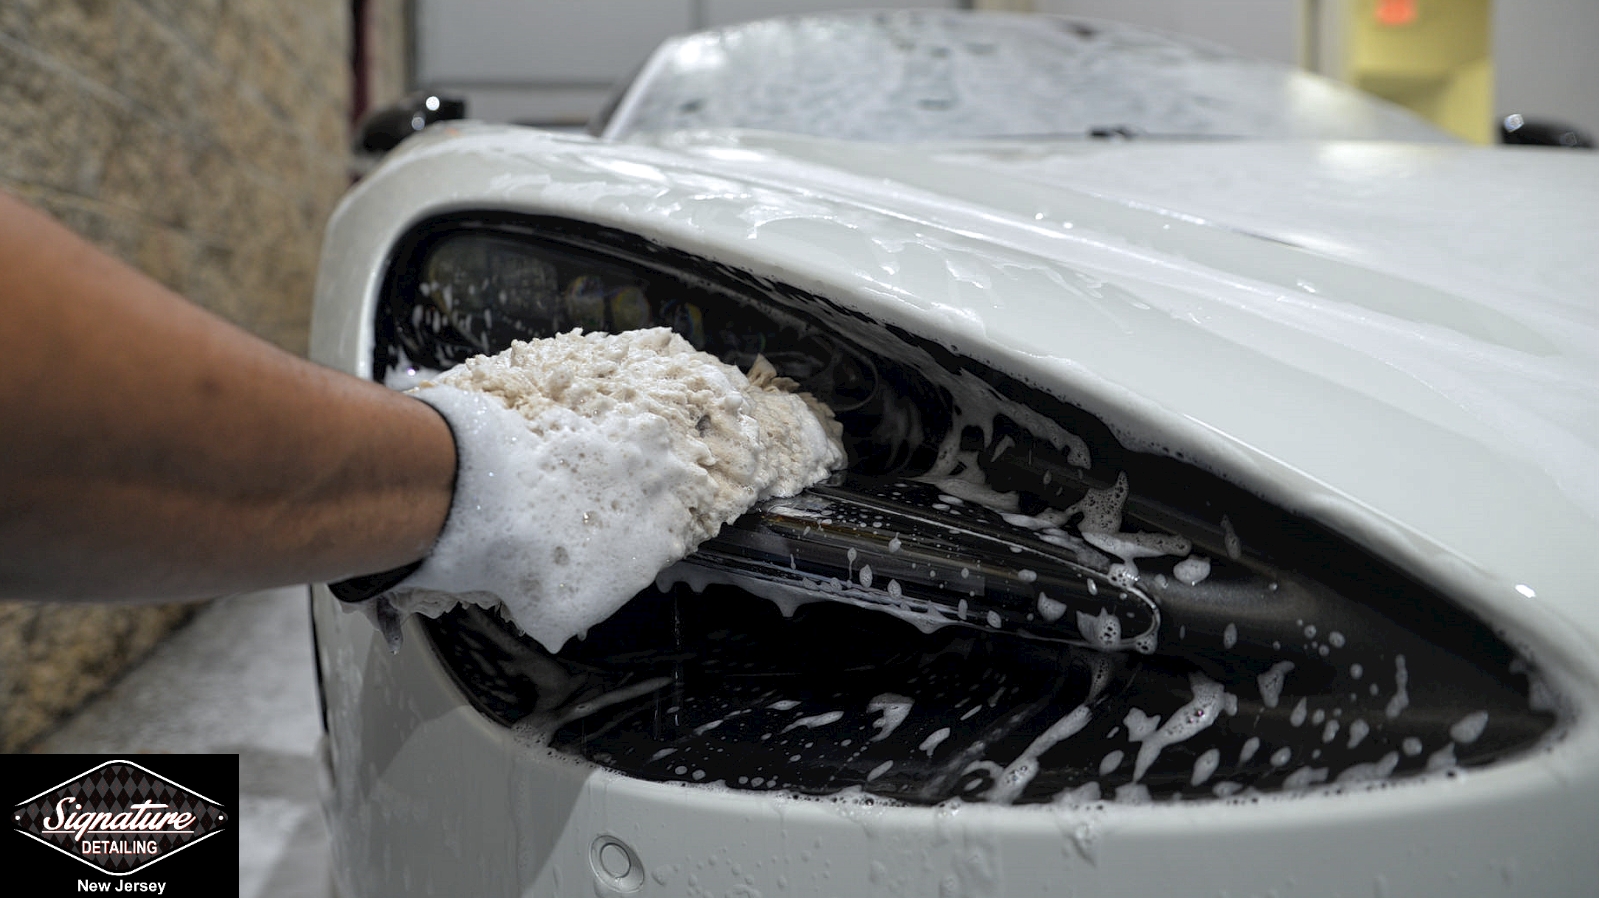 $7/7 Minute TOUCHLESS Car Wash. Is it any GOOD?? Review 